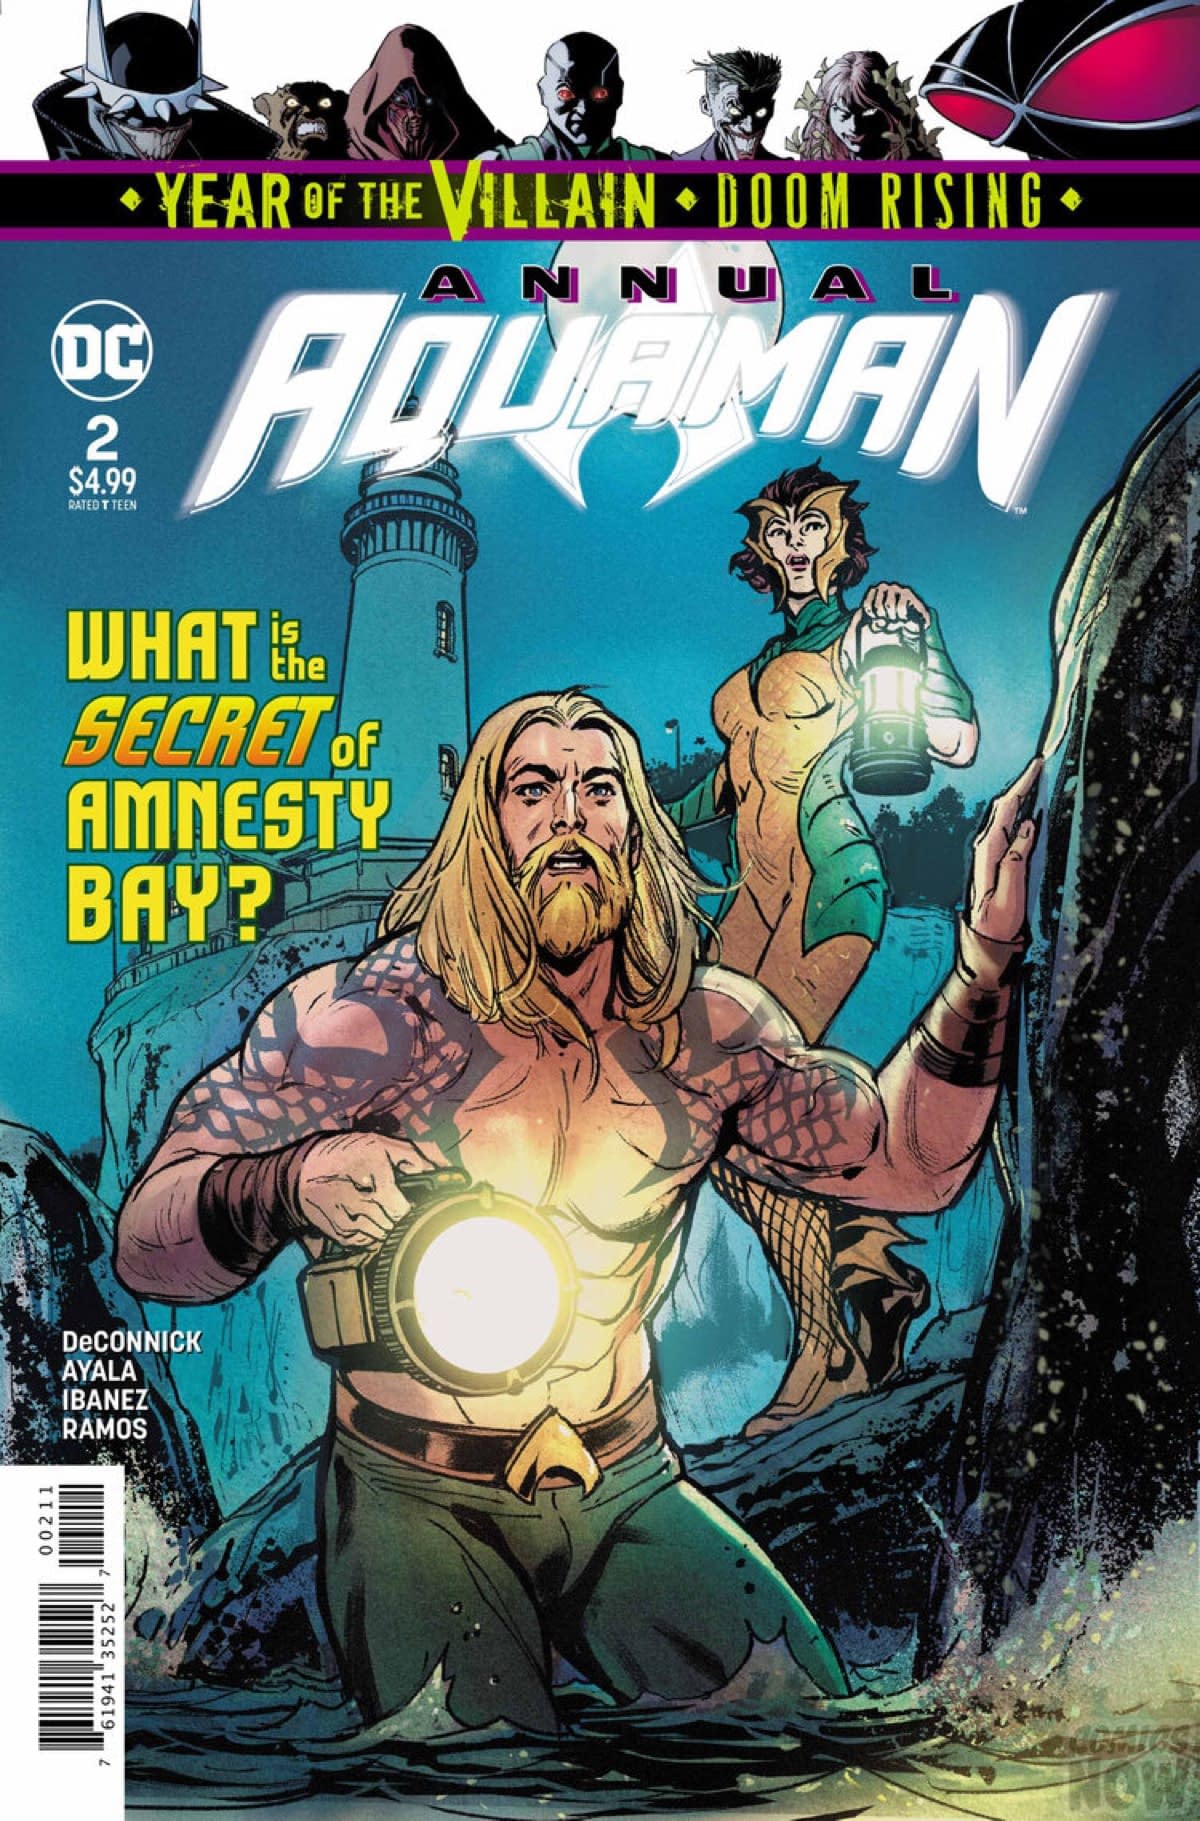 Sea Daddy Shoots Aquaman's Dog in Aquaman Annual #2 [Preview]